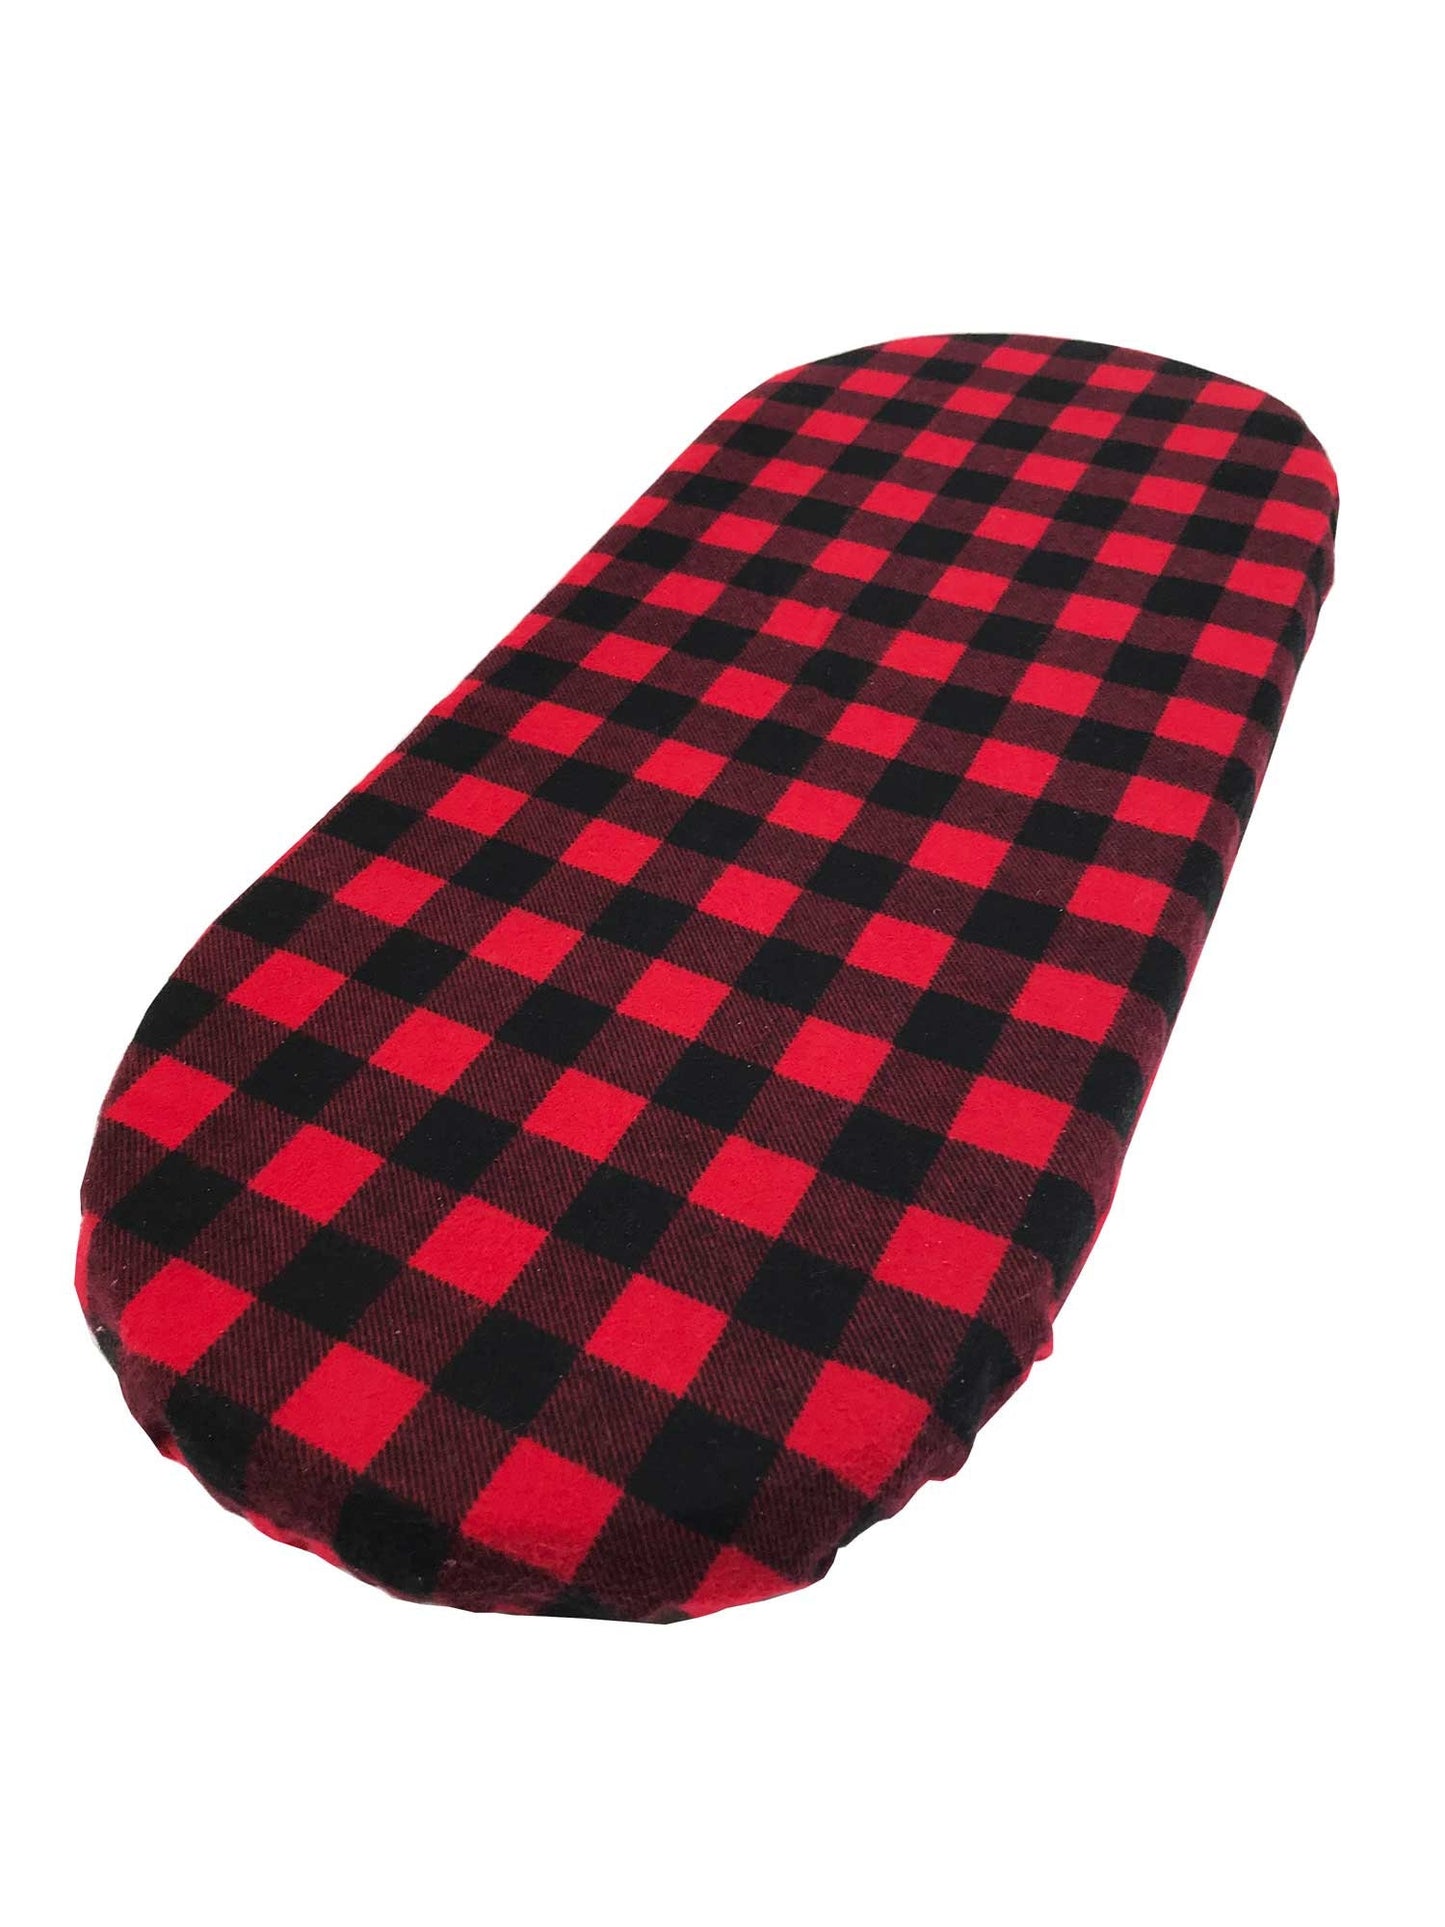 Buffalo Plaid in Red and Black Cotton - Custom Made Fitted Sheet